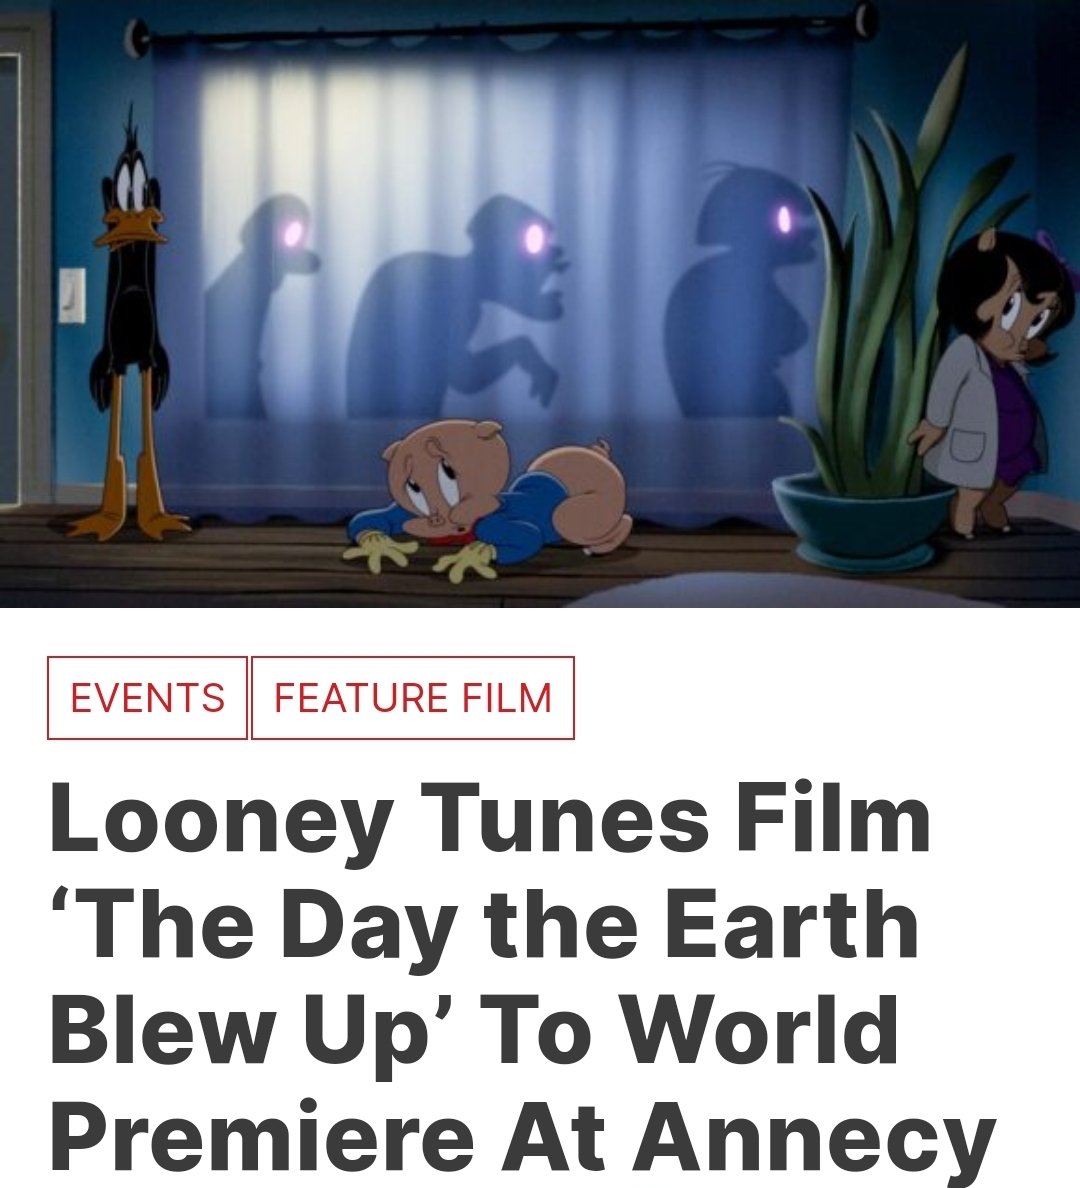 For anyone going to Annecy this year, I hope you get to enjoy this feature film I edited, the first ever all-2D-animated Looney Tunes movie. It really is something special.